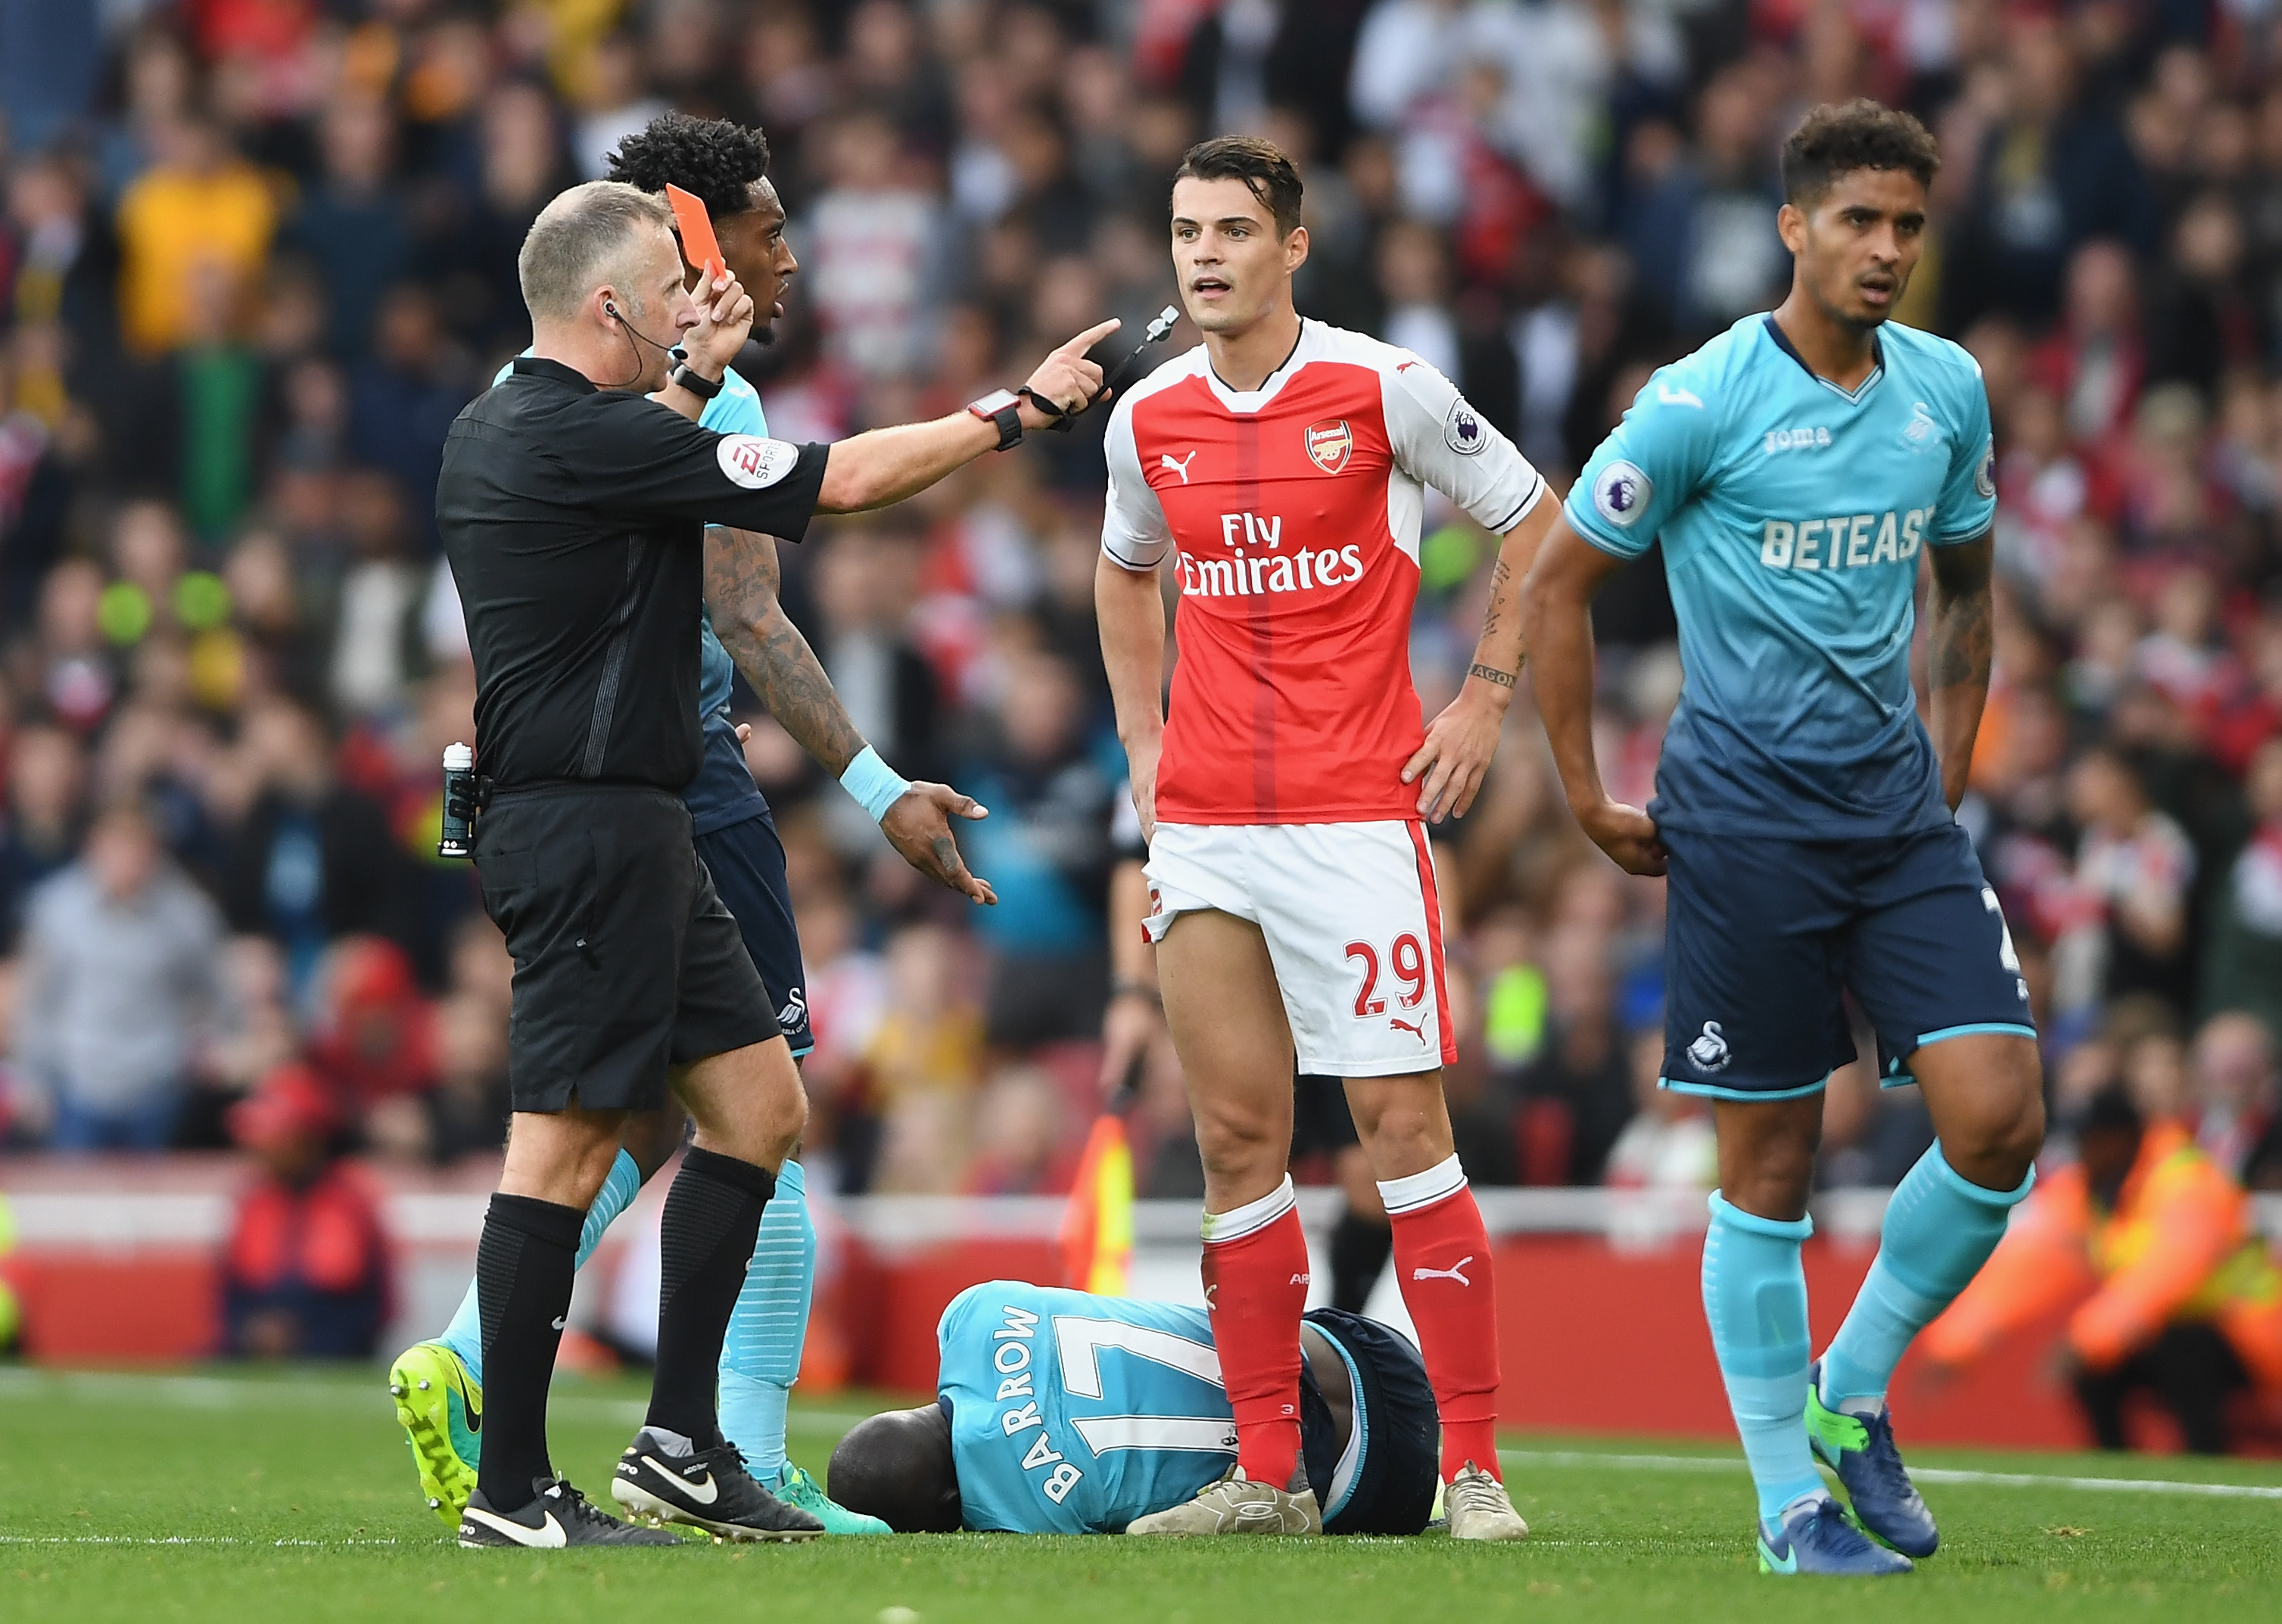 LONDON, ENGLAND - OCTOBER 15: Referee Jonanthan Moss (L) shows Granit Xhaka of Arsenal (C) a red card for a foul on Modou Barrow of Swansea City during the Premier League match between Arsenal and Swansea City at Emirates Stadium on October 15, 2016 in London, England.  (Photo by Mike Hewitt/Getty Images)